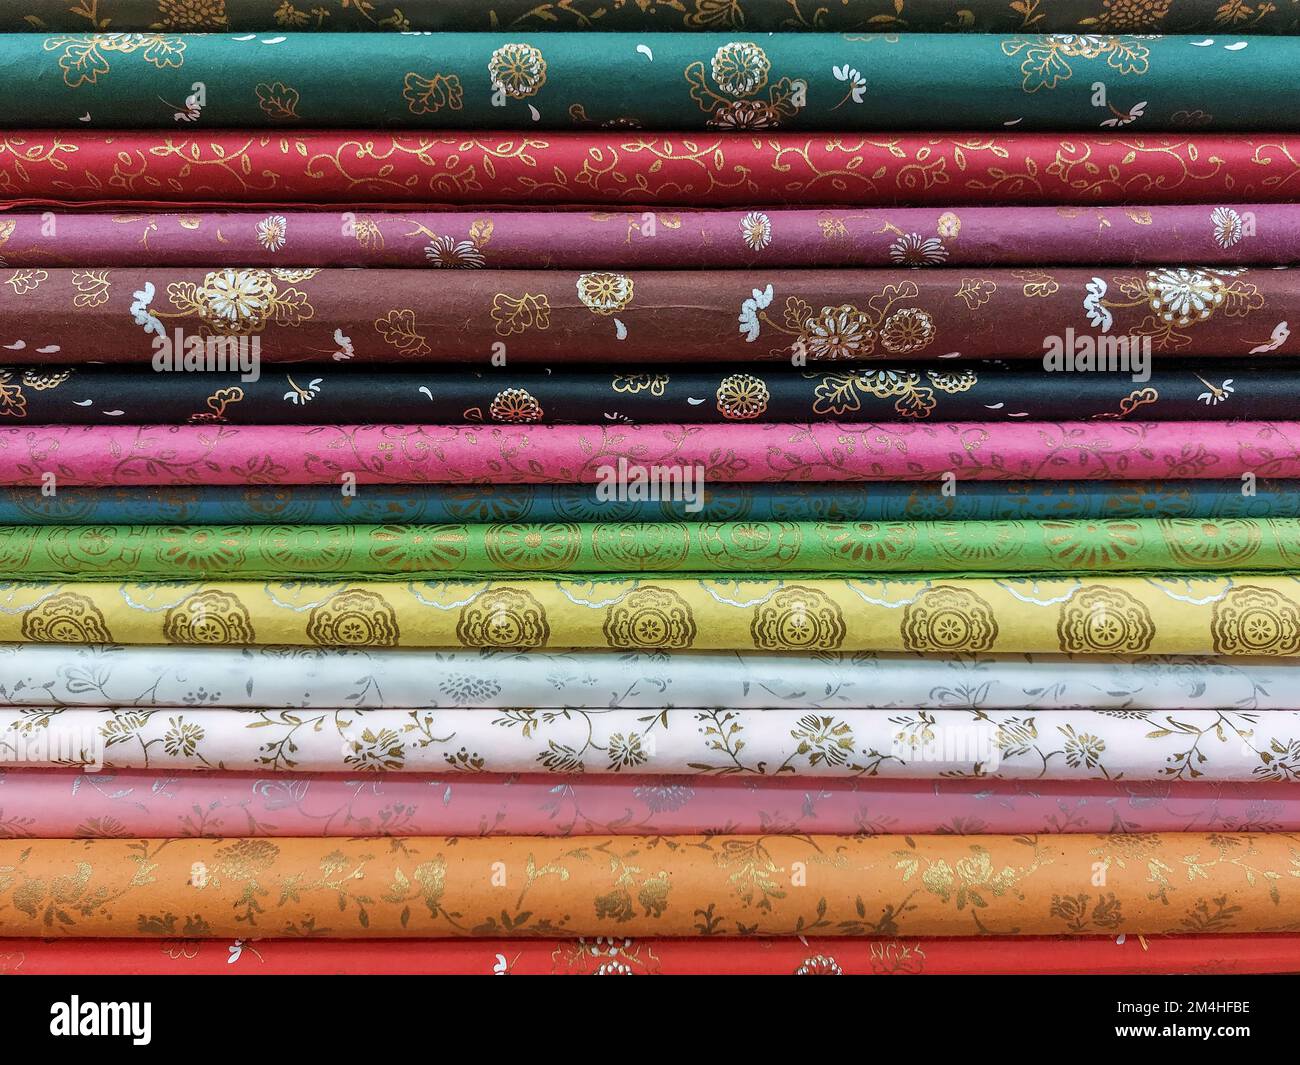 Floral fabrics and other patterns They are folded and stacked in layers and come in a variety of colors, creating a colorful image. Stock Photo